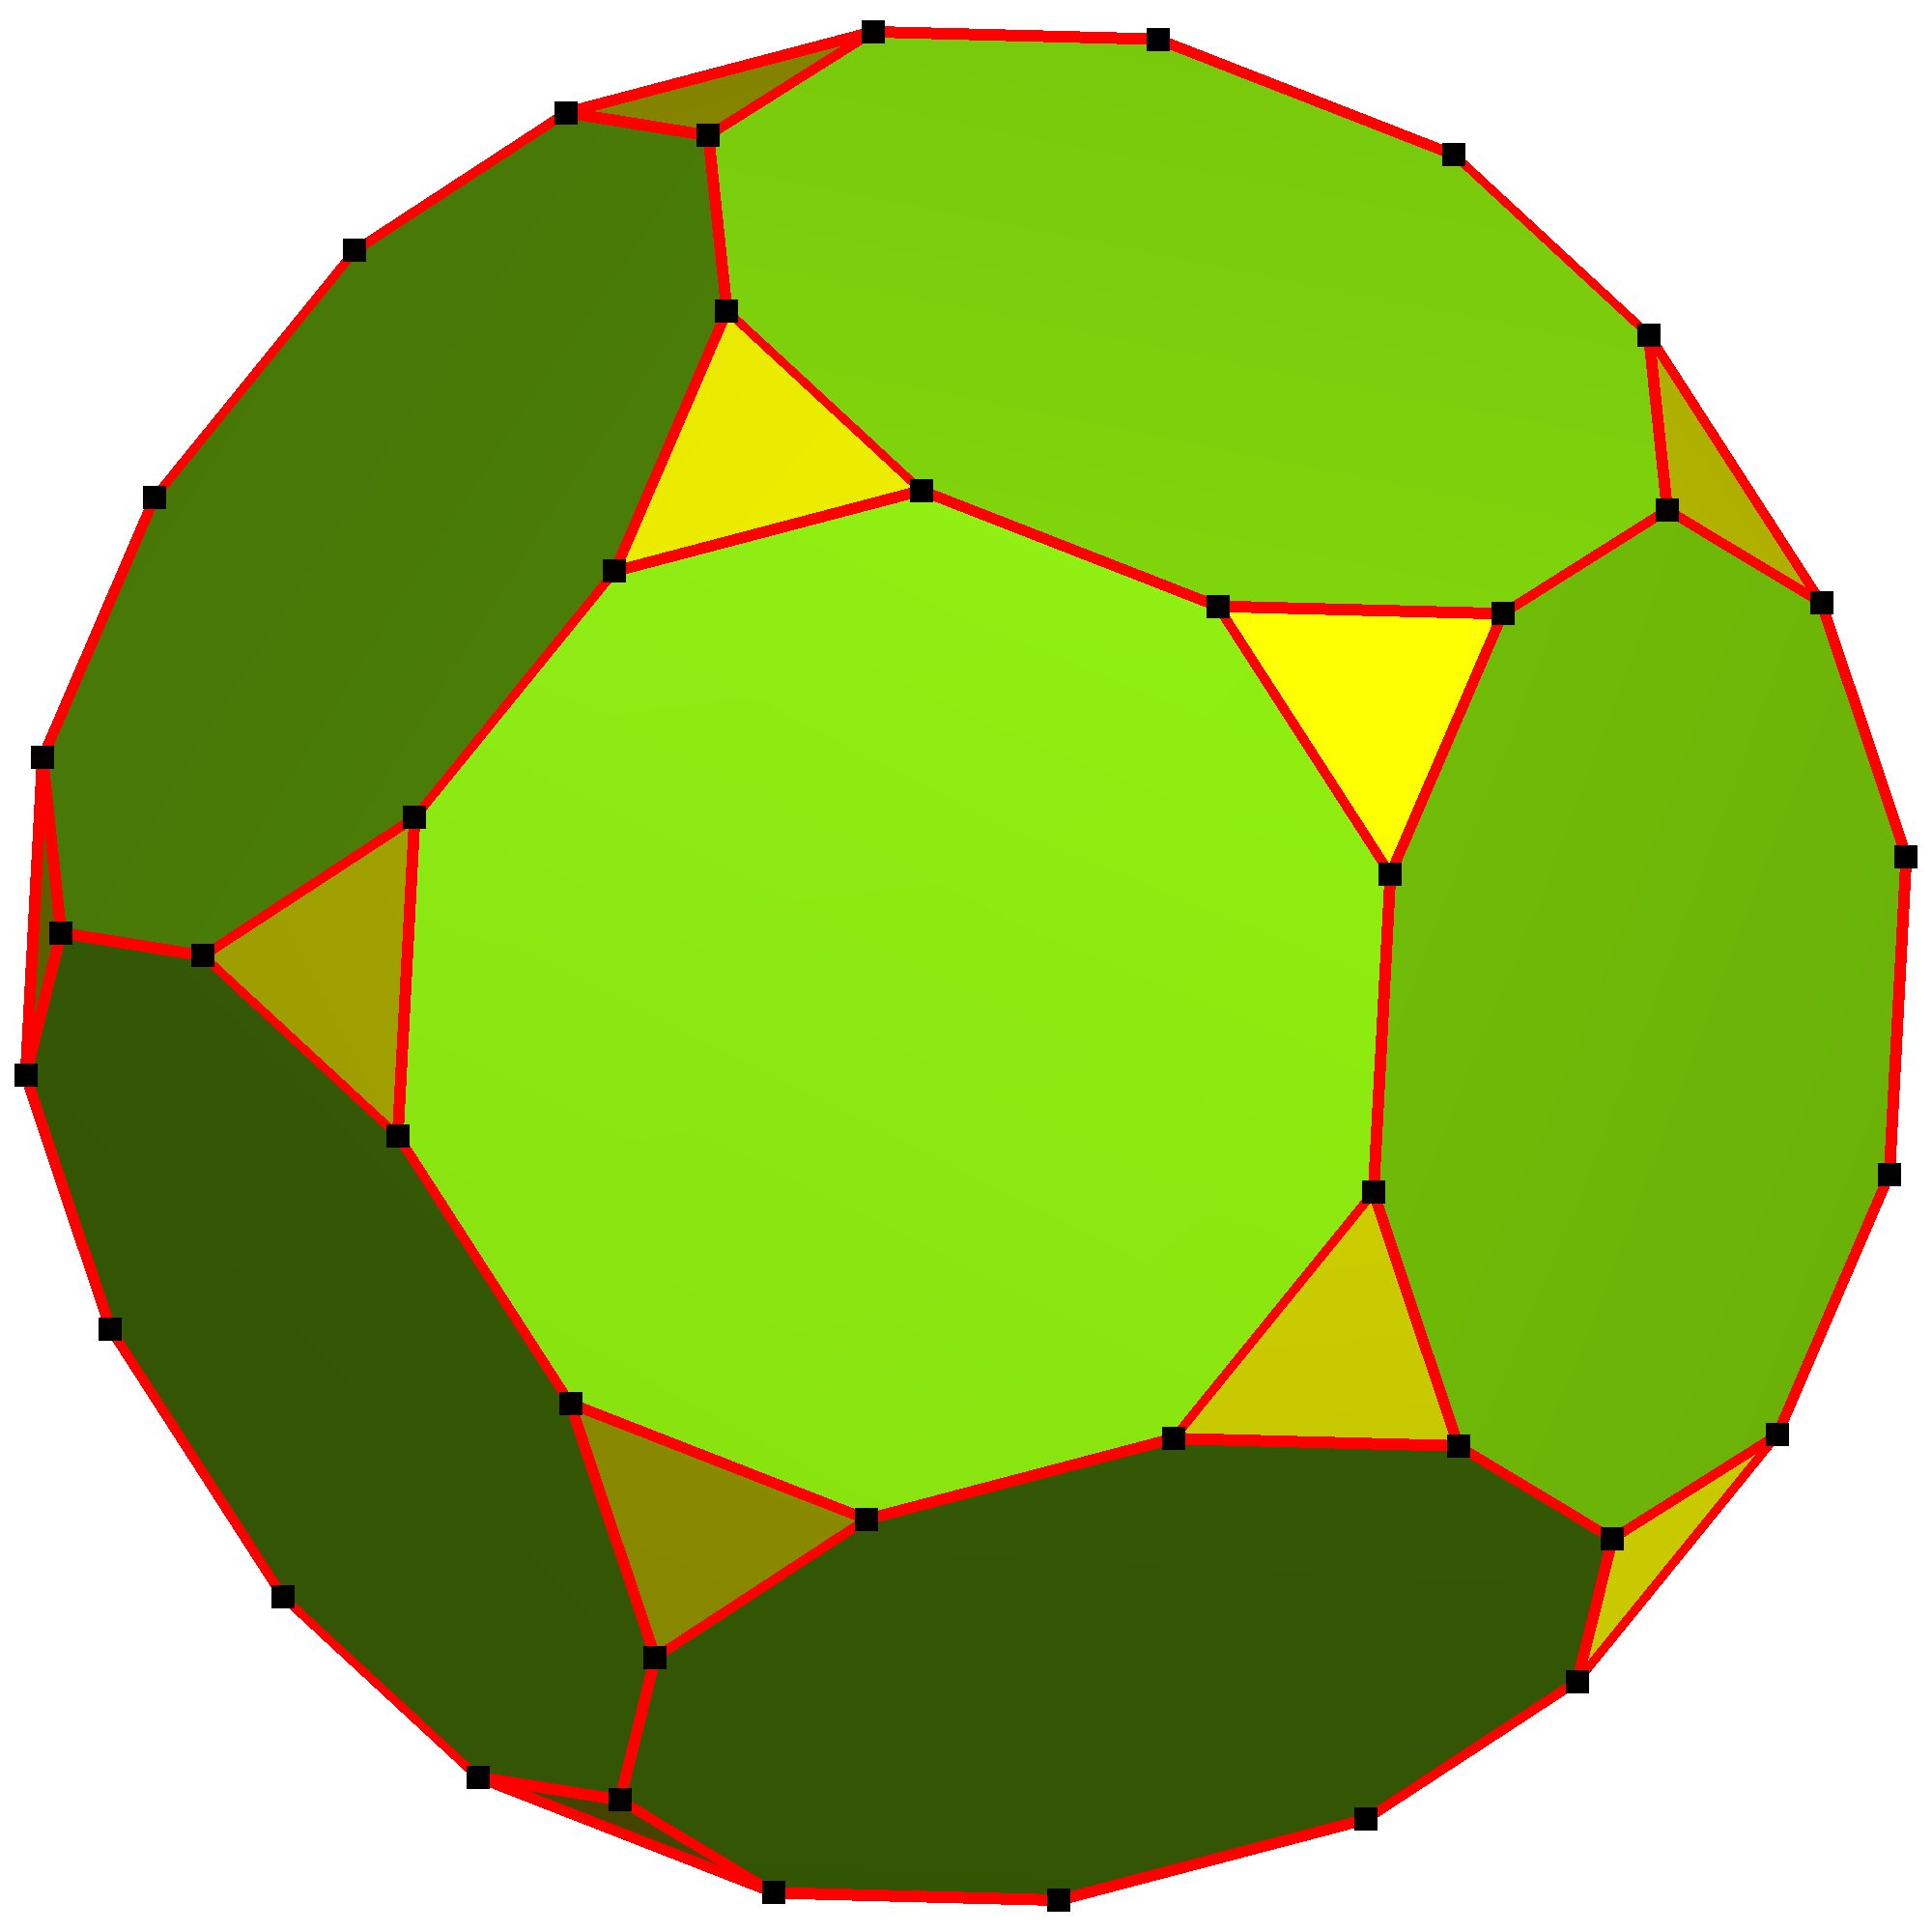 File:Truncated dodecahedron ortho-color.png - Wikimedia Commons